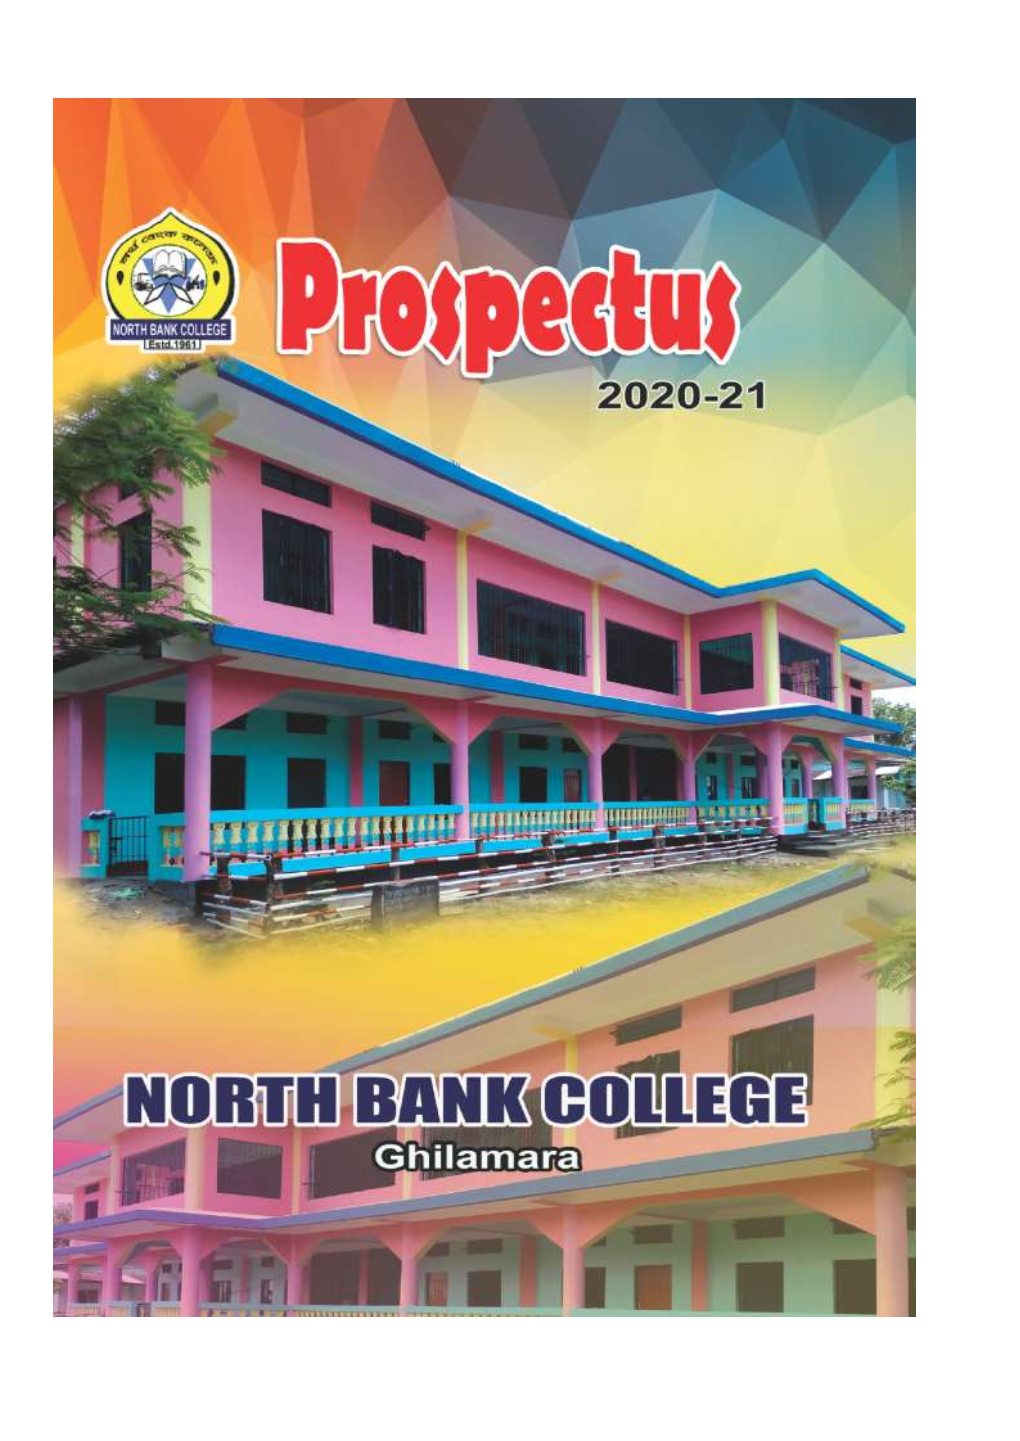 Skill Based Education in North Bank